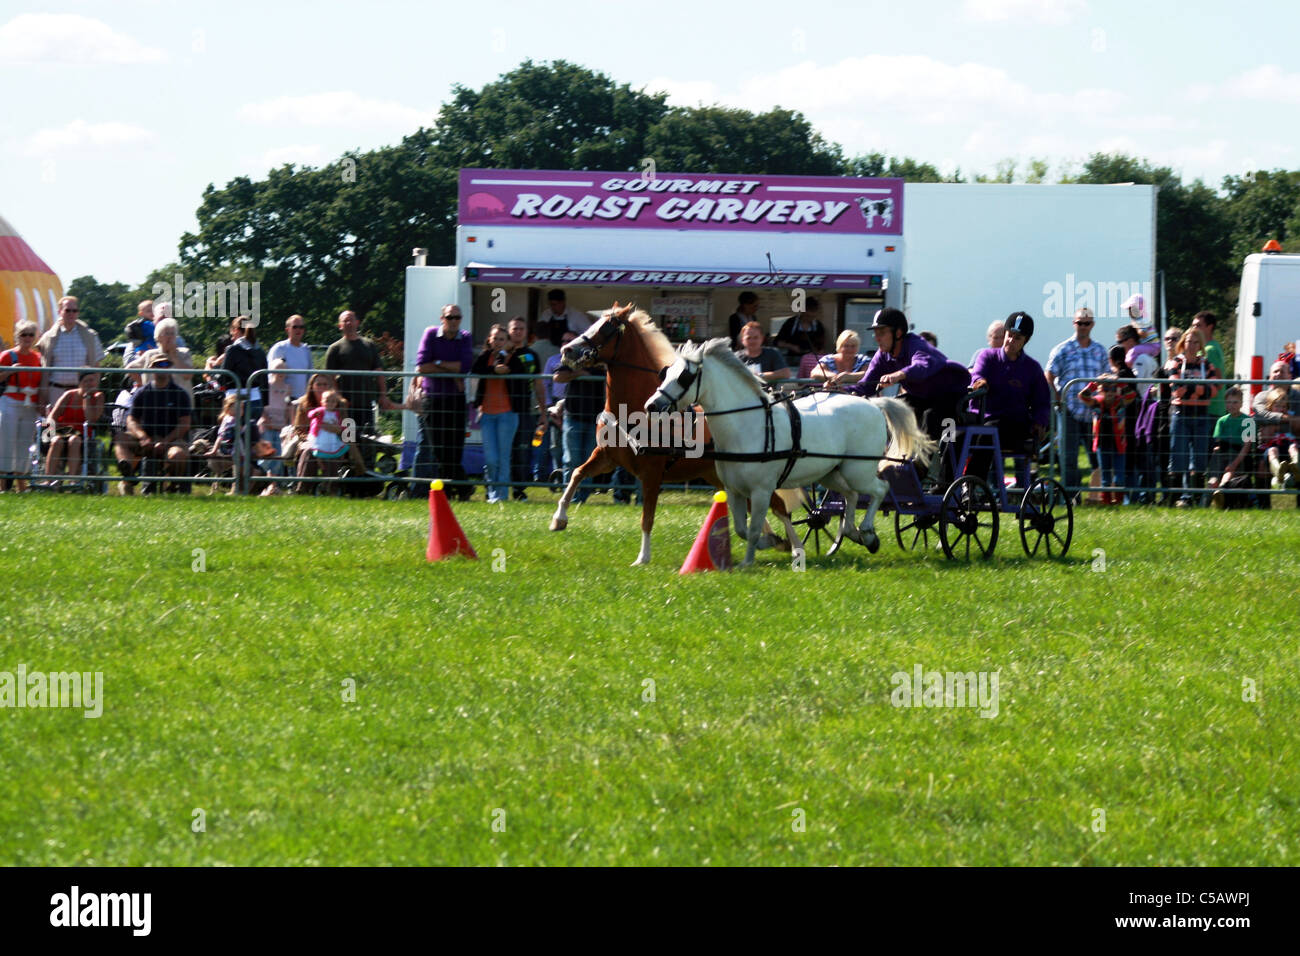 Scurry racing at Cheshire game and country show at Cheshire Show Ground Tabley Cheshire England Stock Photo